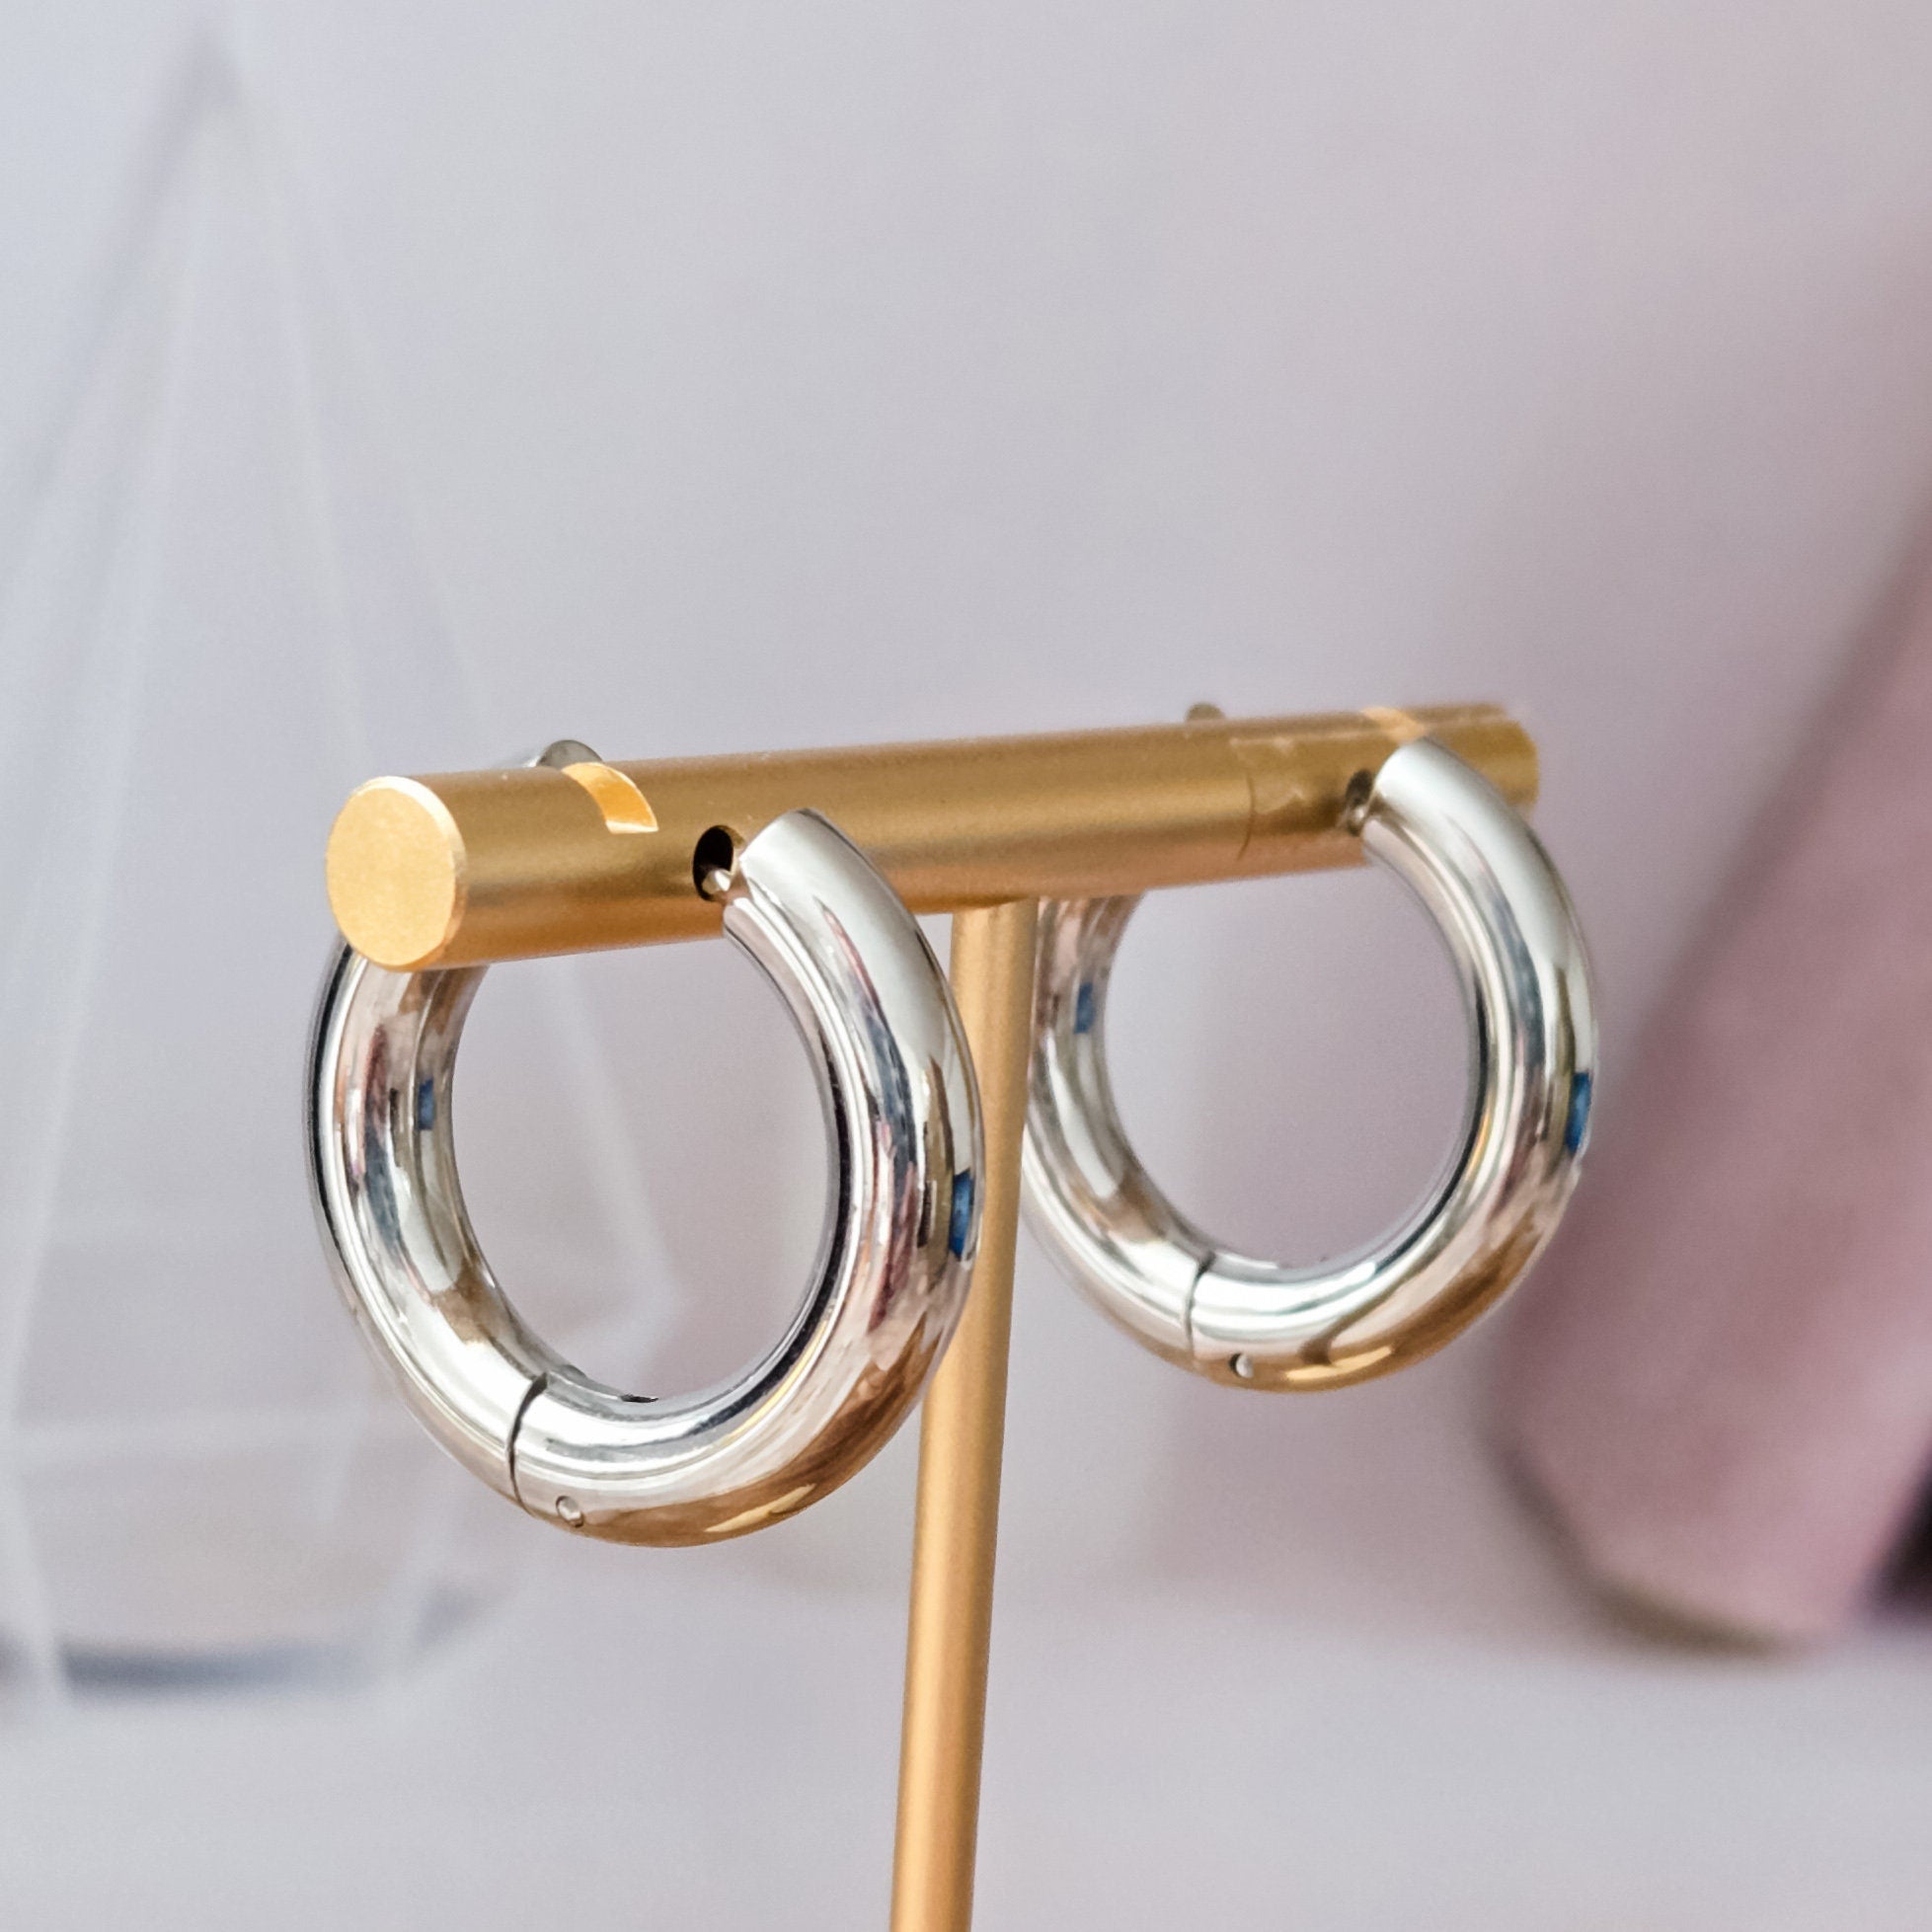 Chunky Gold Hoop Earrings, Trending Statement Jewelry, Women's Thick Silver Huggie Hoops, Trendy Jewelry Graduation Gift for Her Salt and Sparkle